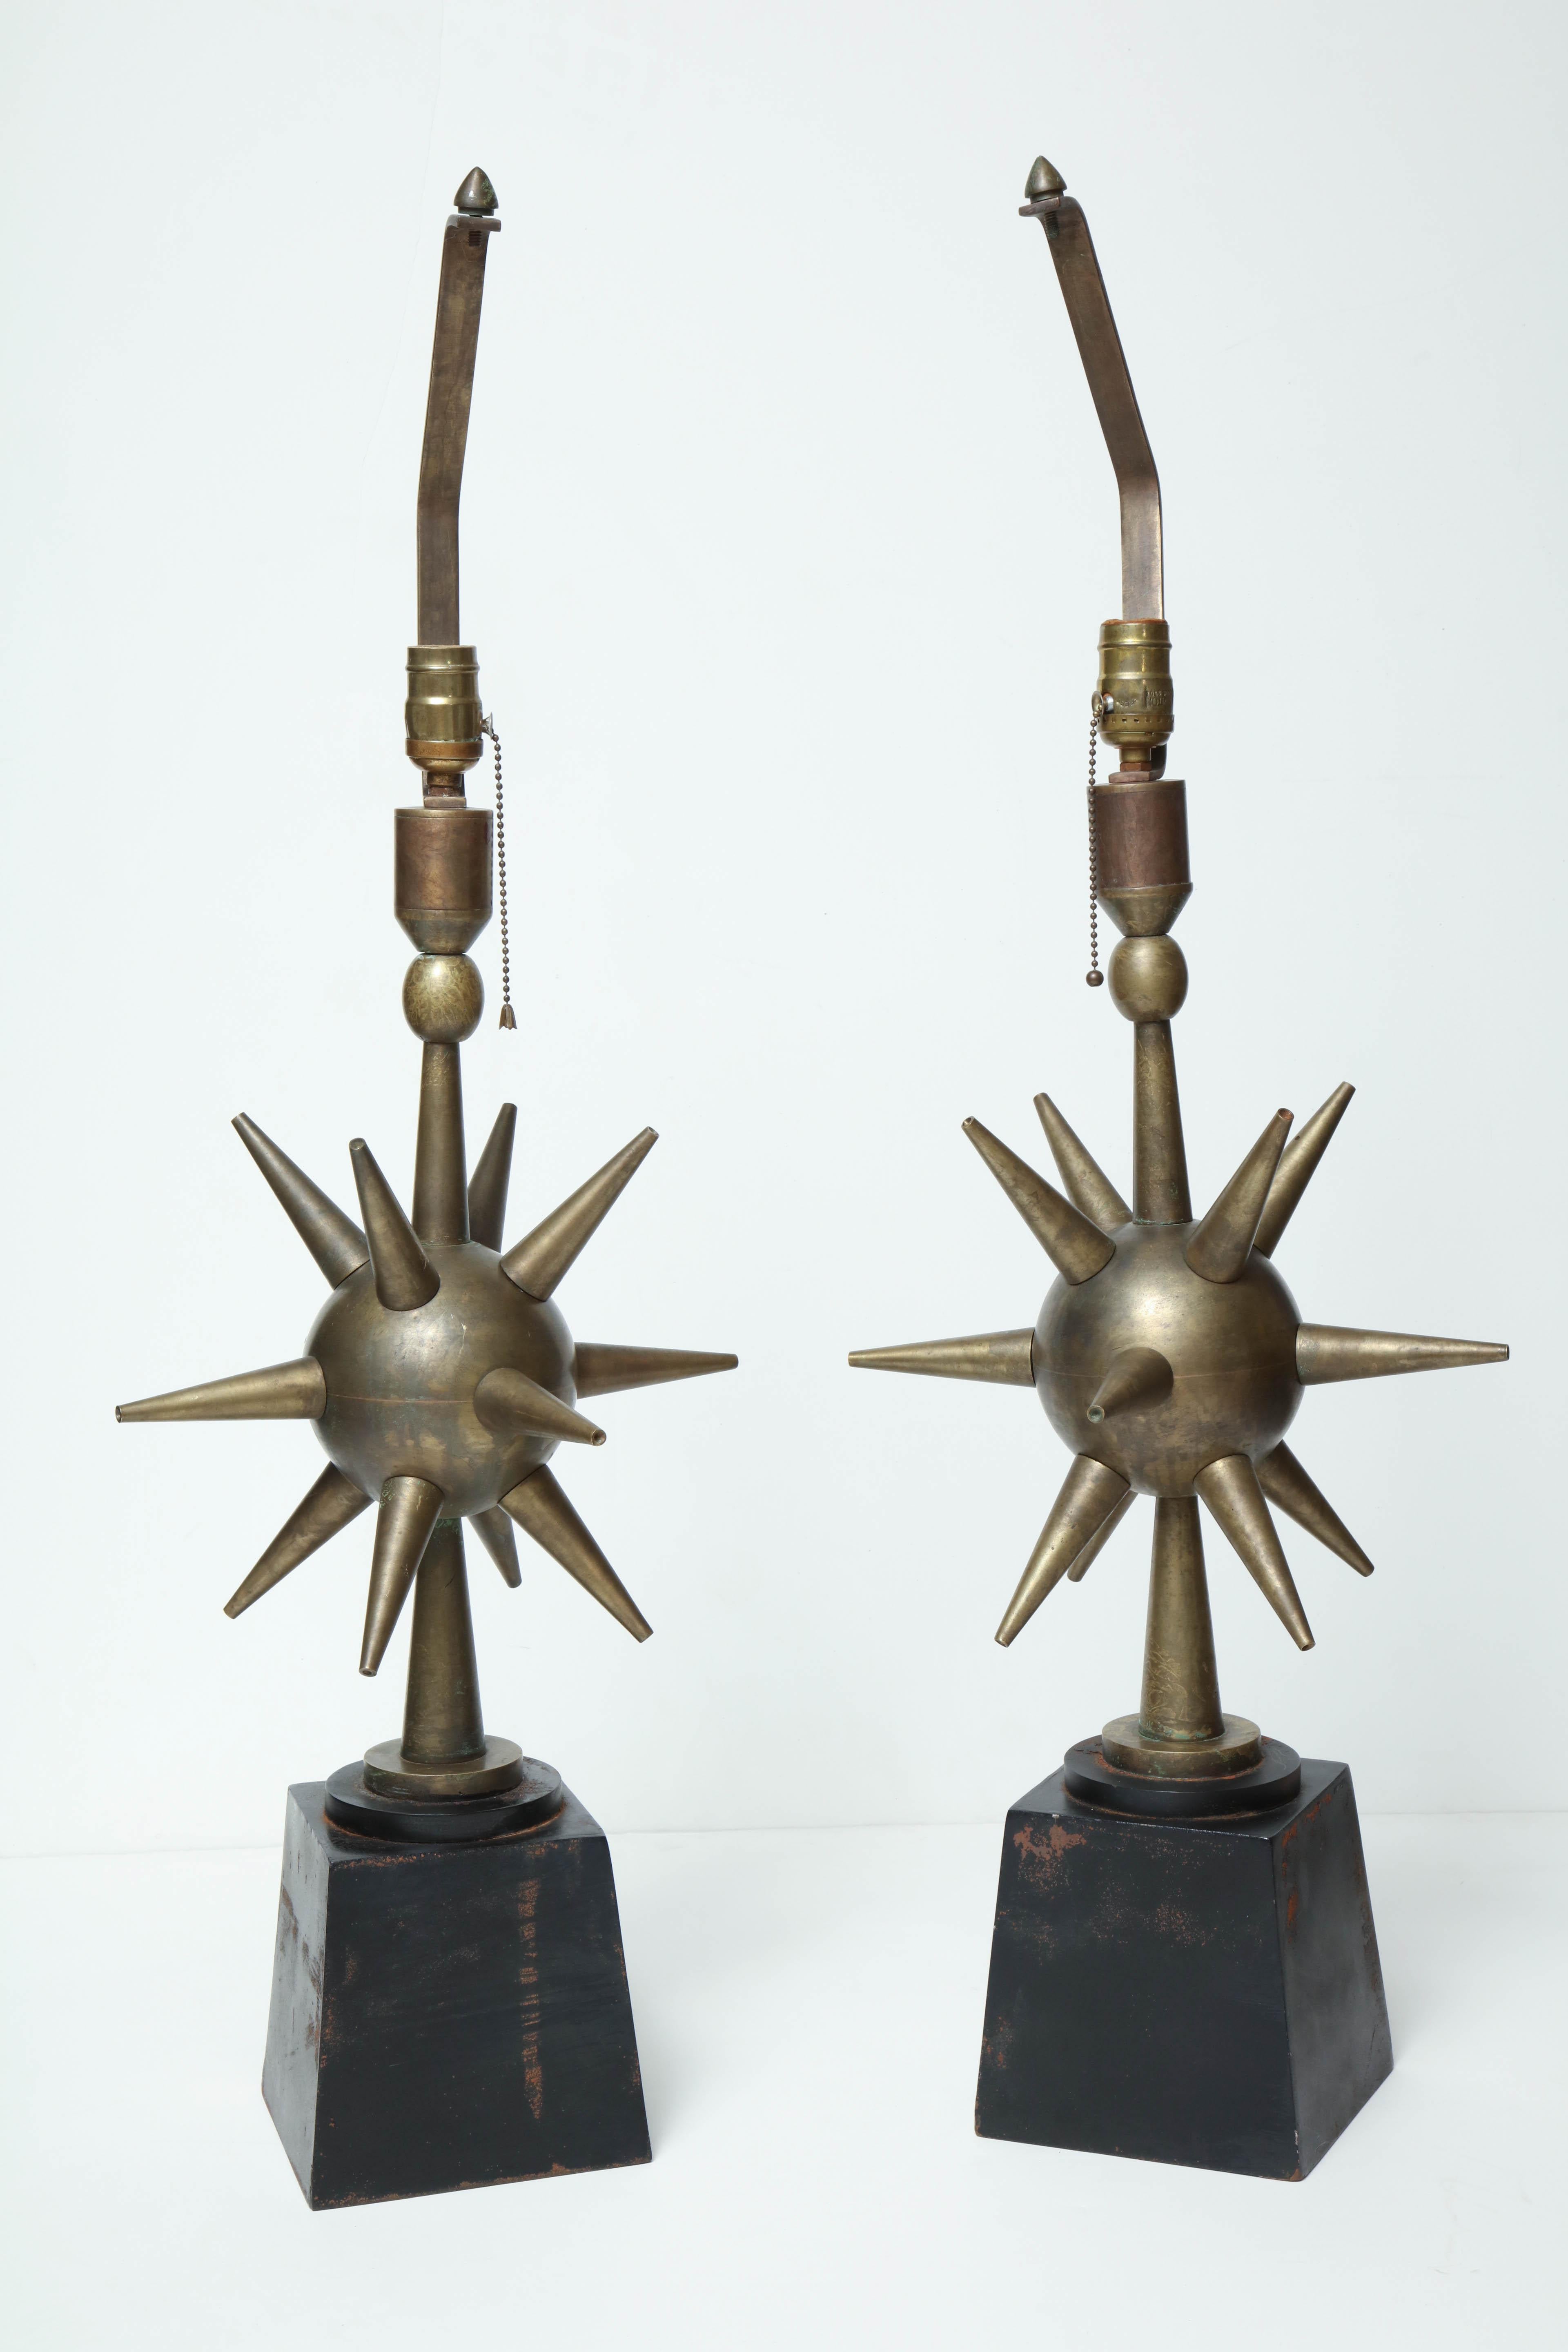 Pair of Mid-Century Modern sphere starburst table lamps, designed in the style of Arturo Pani, Sputnik forms in bronze, raised on tapered bases, painted black.
Good vintage condition, with age appropriate wear and patina.